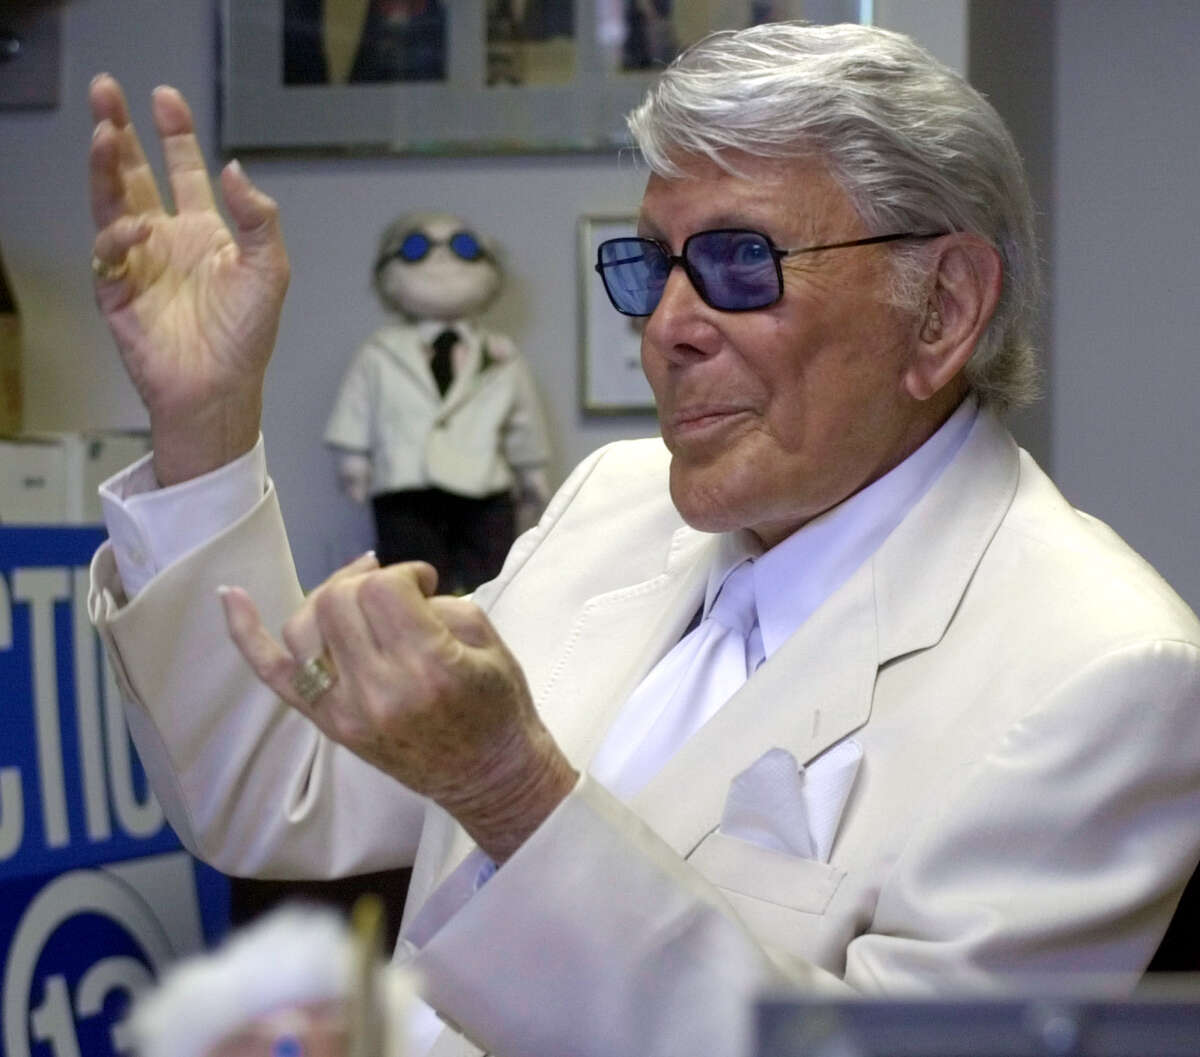 Remembering Houston media icon Marvin Zindler a decade after his passing